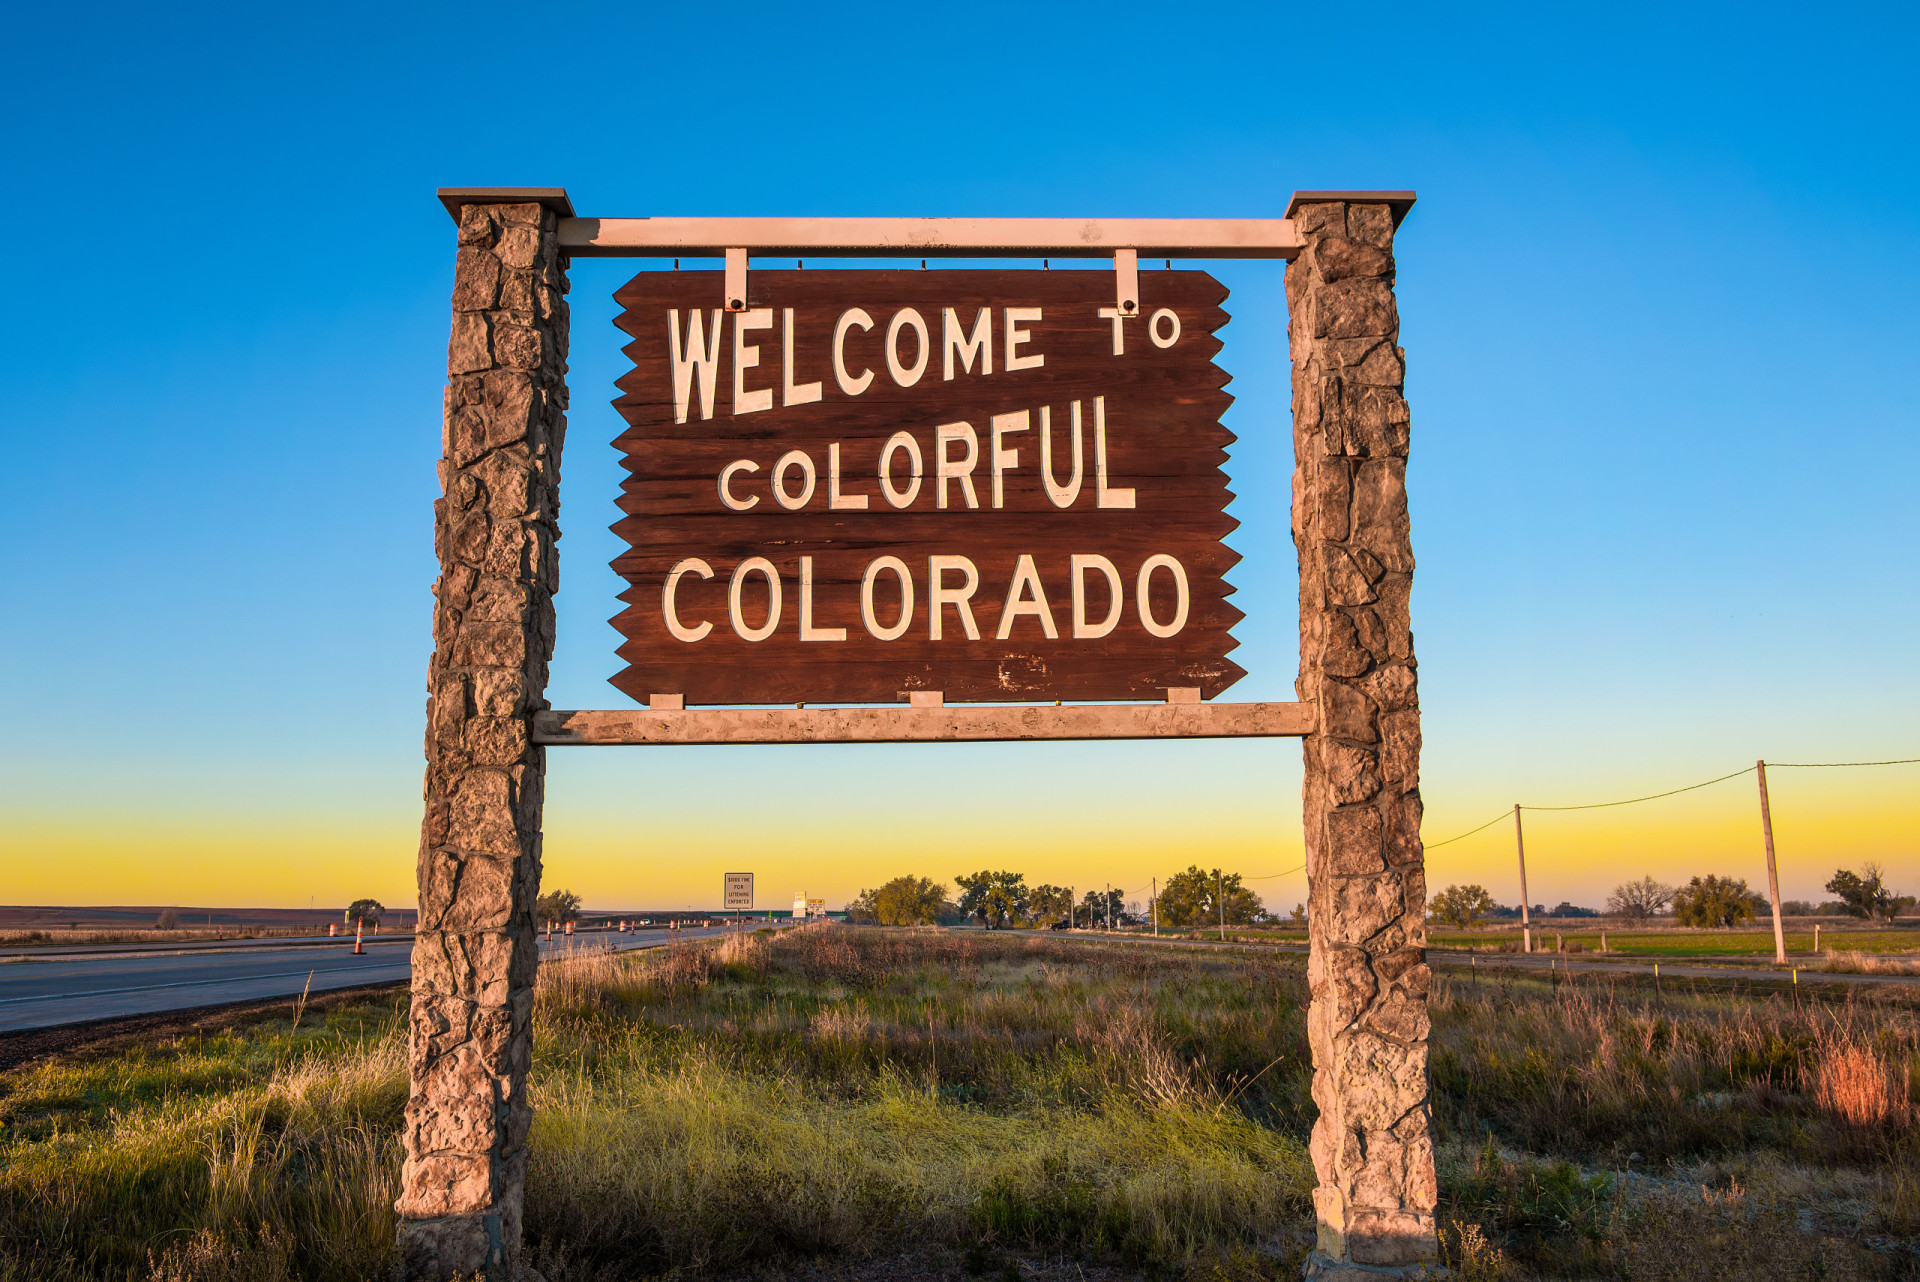 <p>Colorful Colorado is home to magnificent scenery, including hot springs, mountains, and the tallest sand dune in America. </p><p>You may also like:<a href="https://www.starsinsider.com/n/217858?utm_source=msn.com&utm_medium=display&utm_campaign=referral_description&utm_content=572689en-en"> The most radical celebrity transformations </a></p>